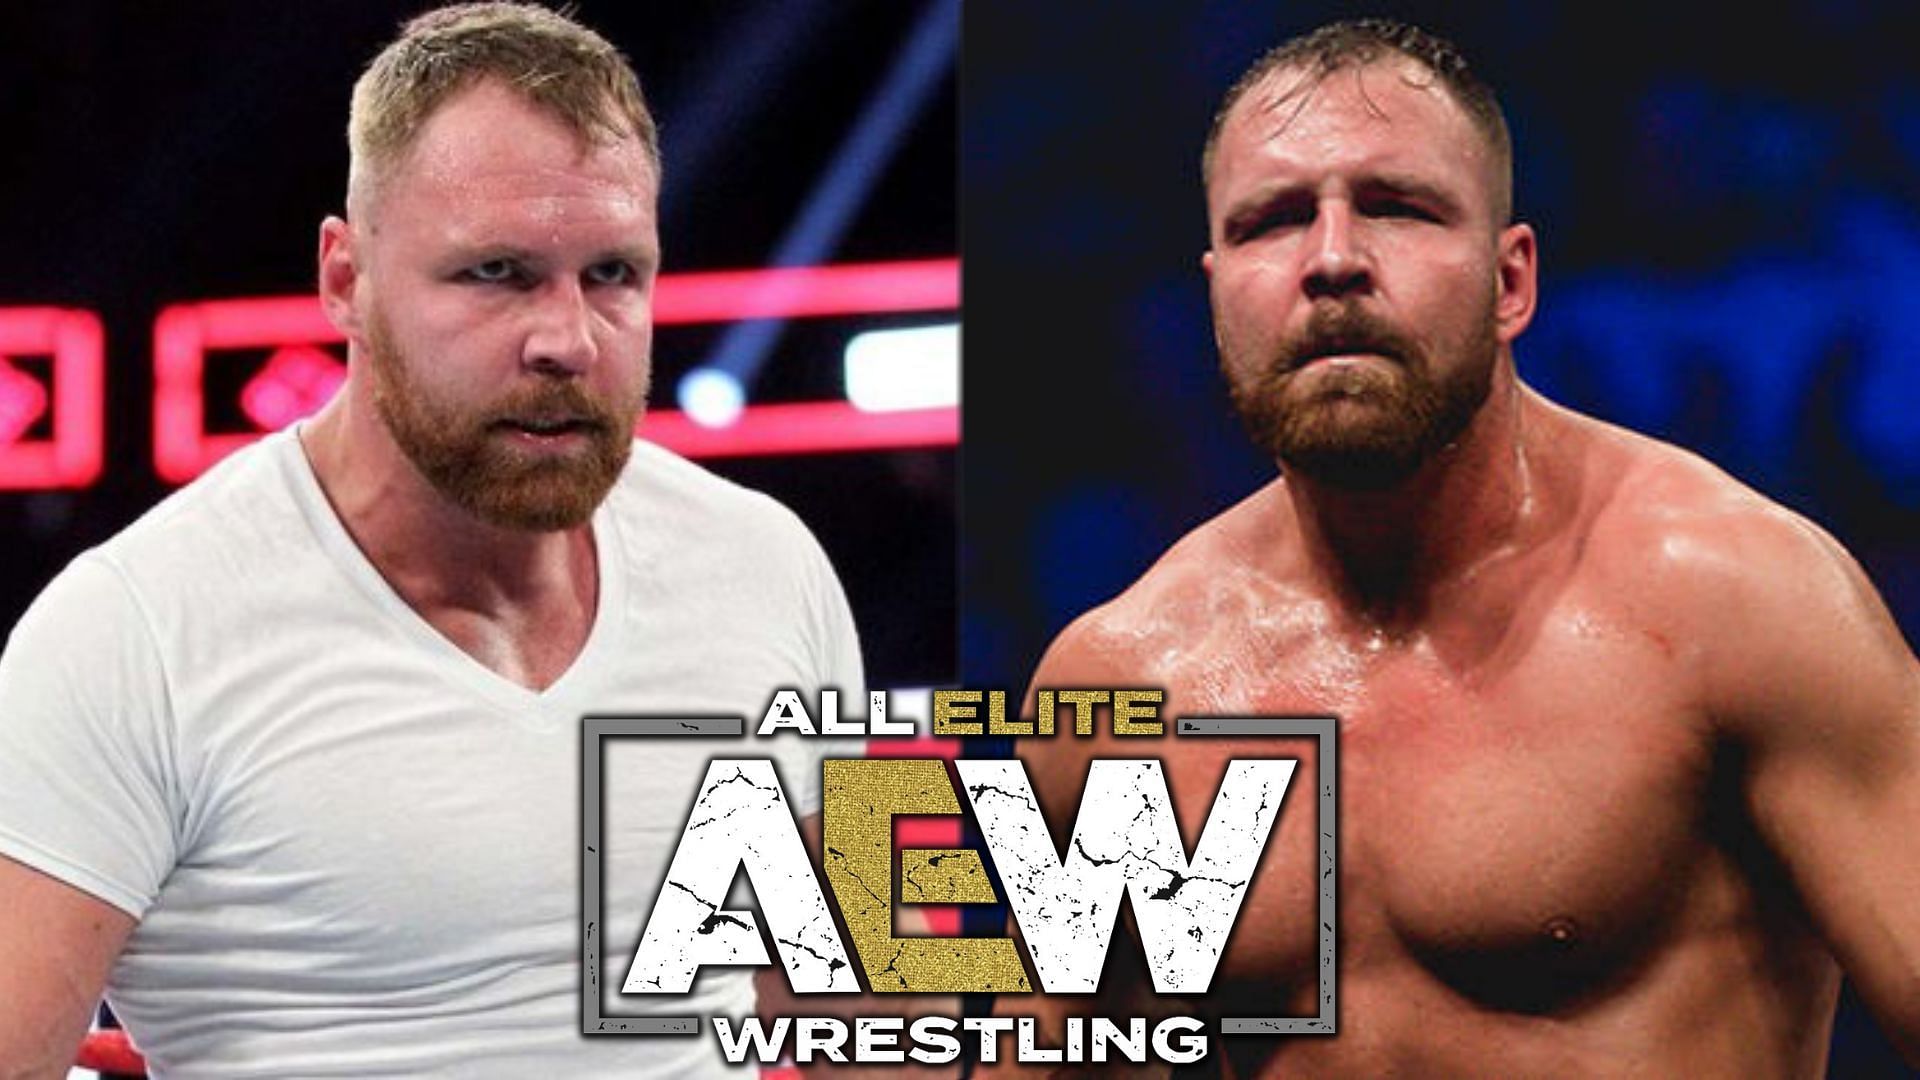 Jon Moxley is one of the biggest names on the AEW roster.